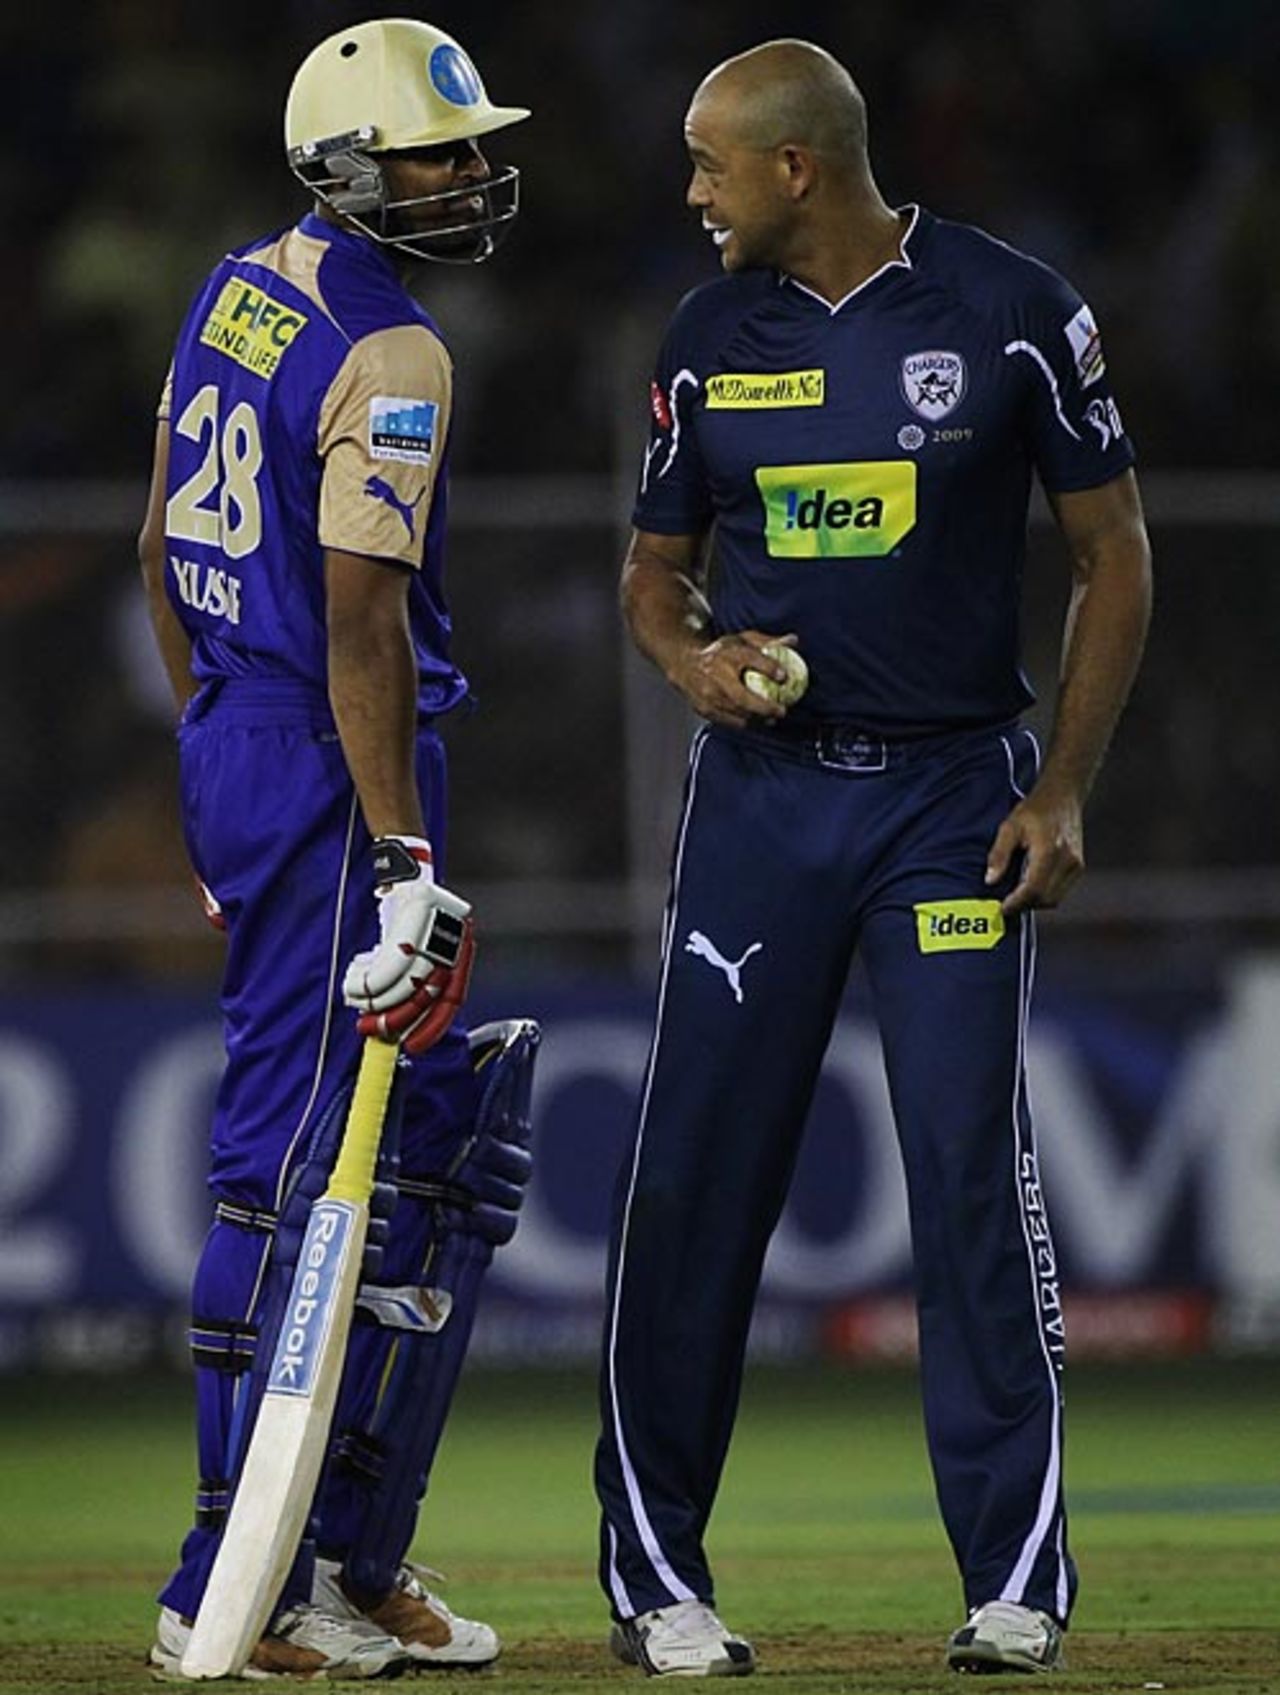 Andrew Symonds has a word with Yusuf Pathan, Rajasthan Royals v Deccan Chargers, IPL, March 26, 2010